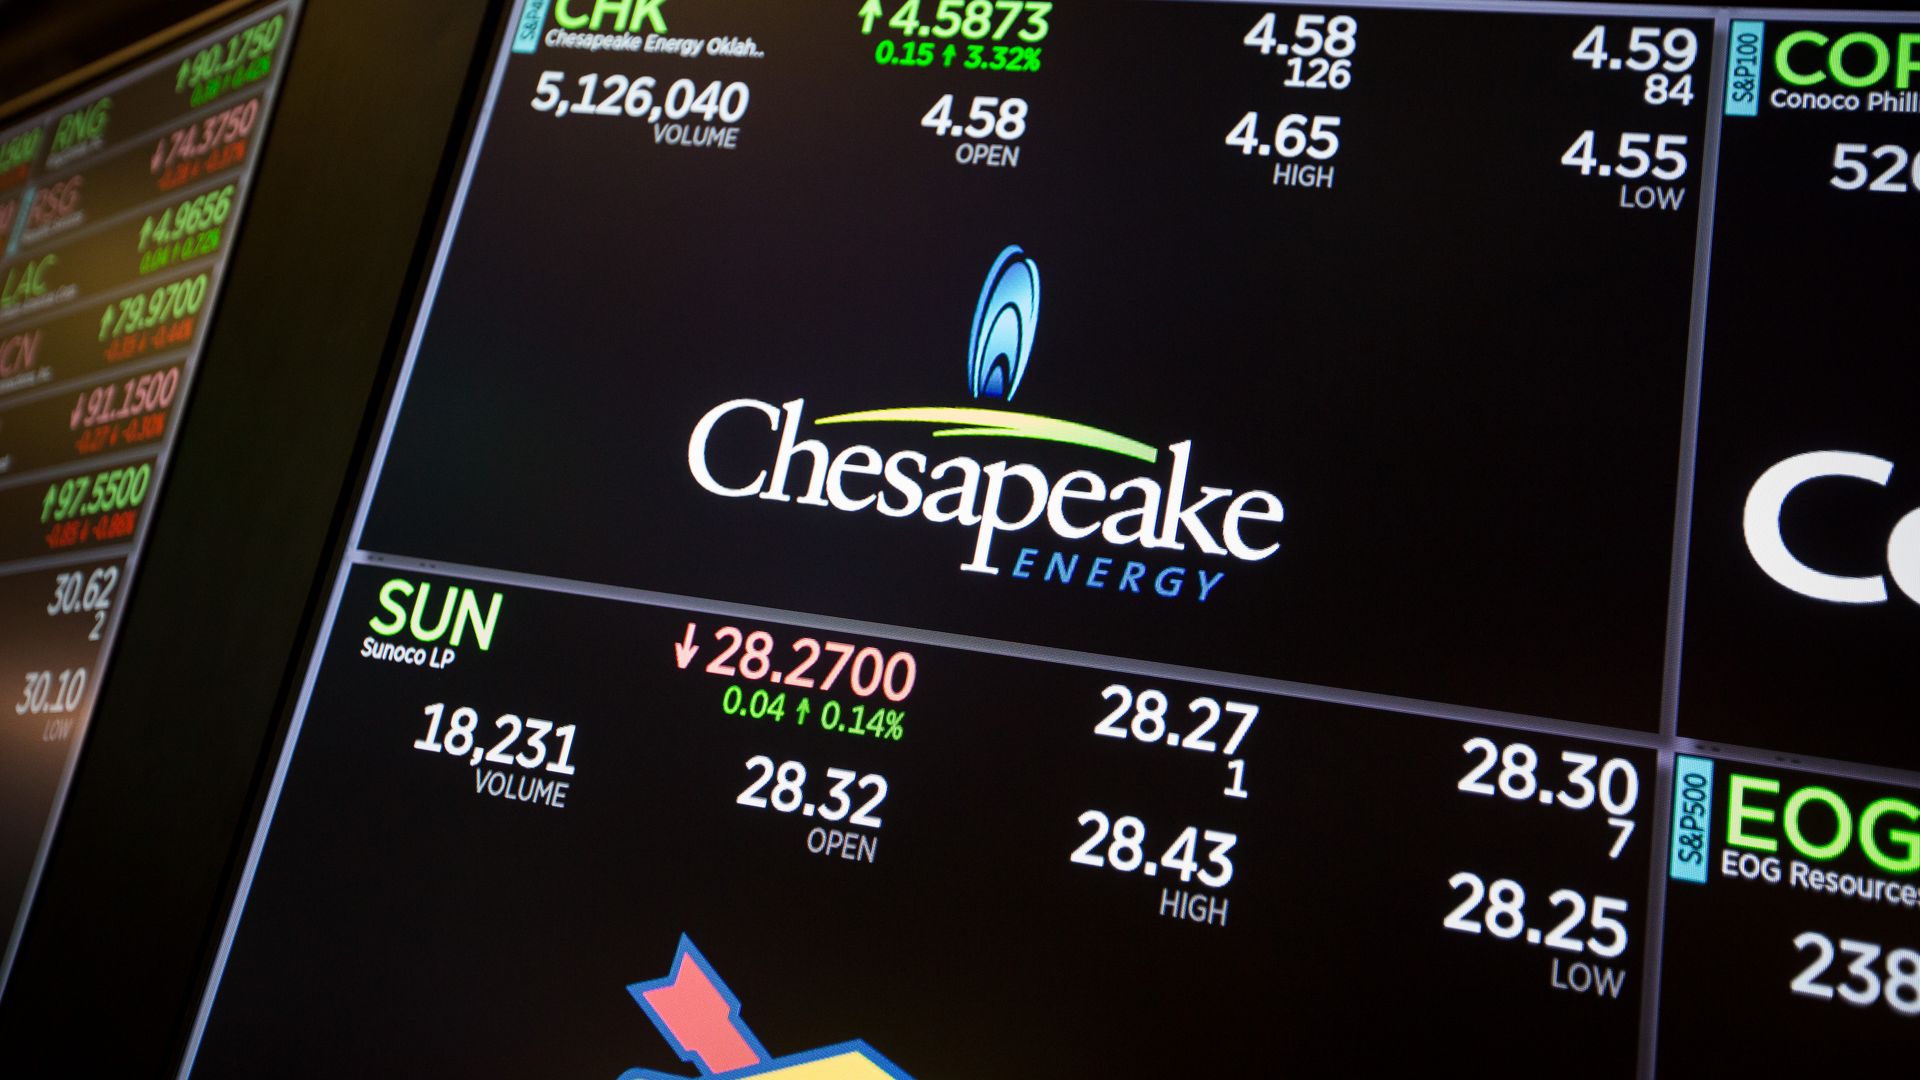 Picture of a monitor displaying Chesapeake Energy Corp. signage